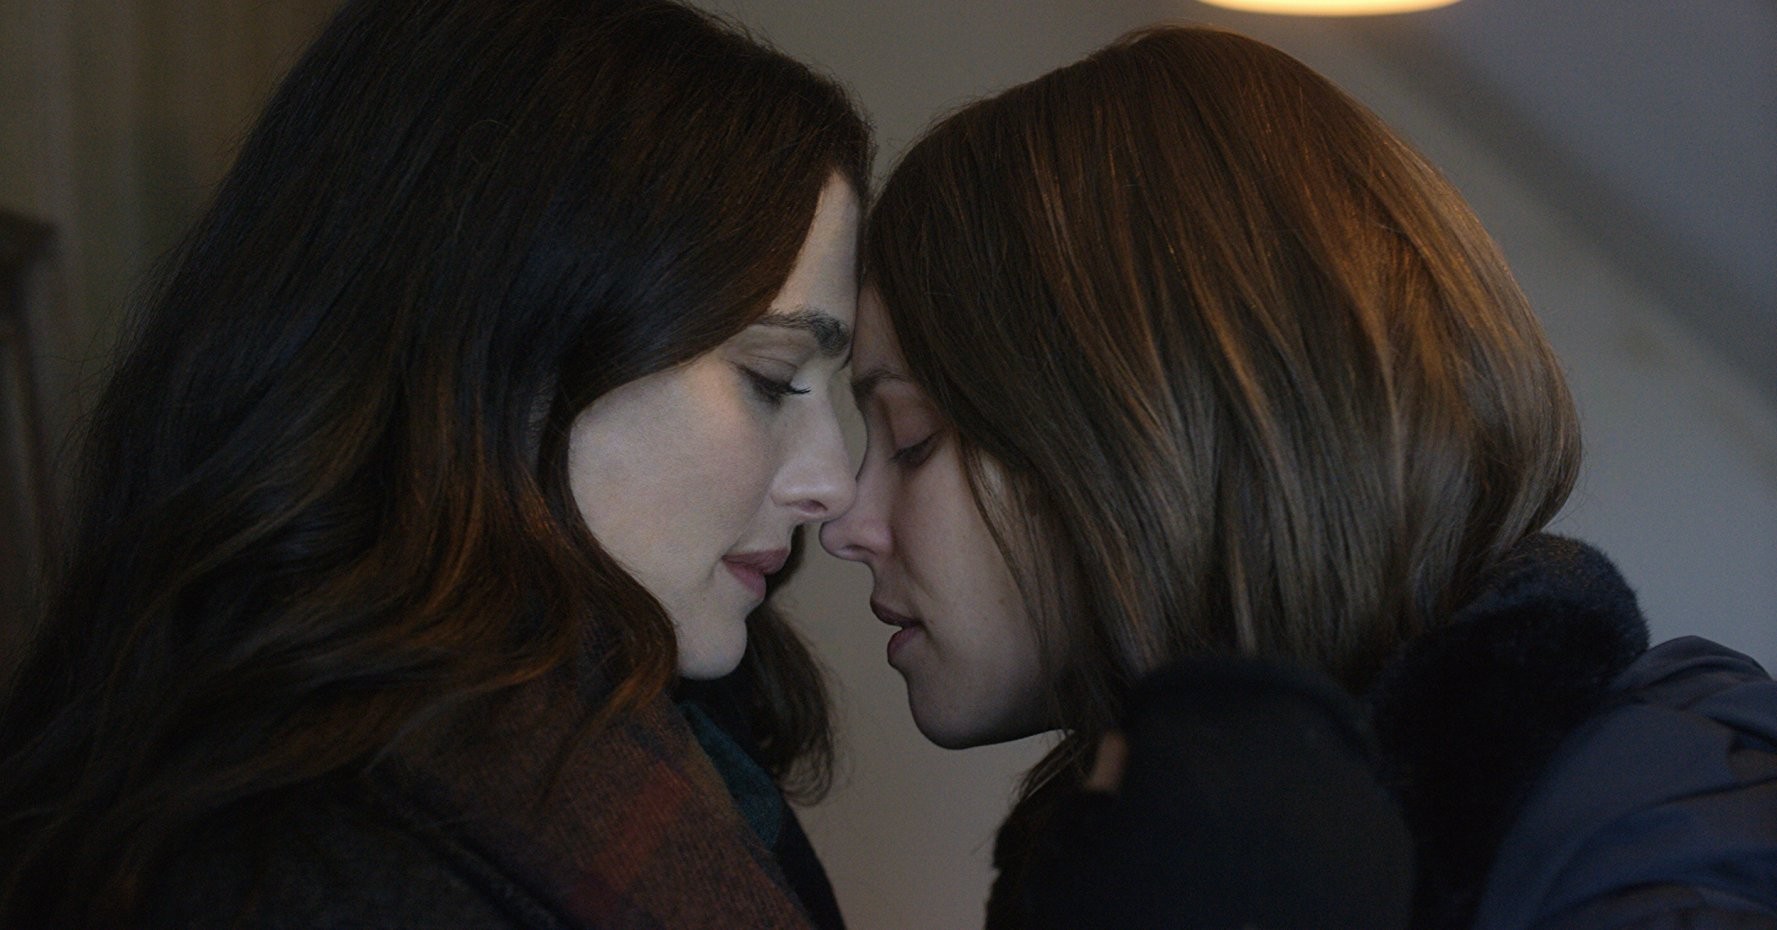 Disobedience is a Mature, Lesbian Narrative Exploring Conflict Between Free  Will, Religious Obligation | Movie Reviews & News | San Antonio | San  Antonio Current